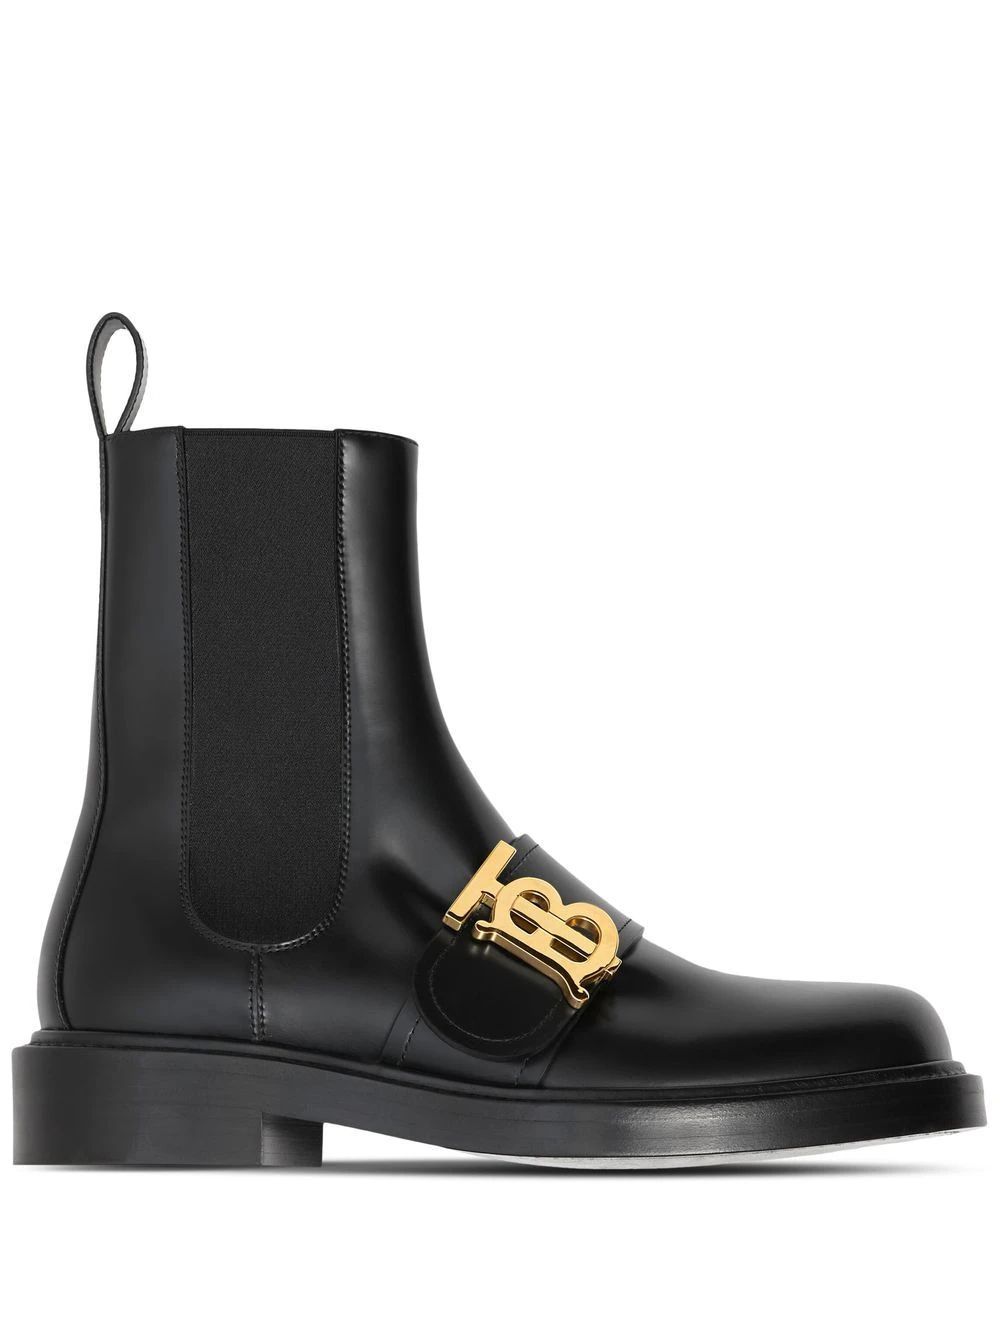 Burberry TB Plaque Leather Ankle Boots - Farfetch | Farfetch Global